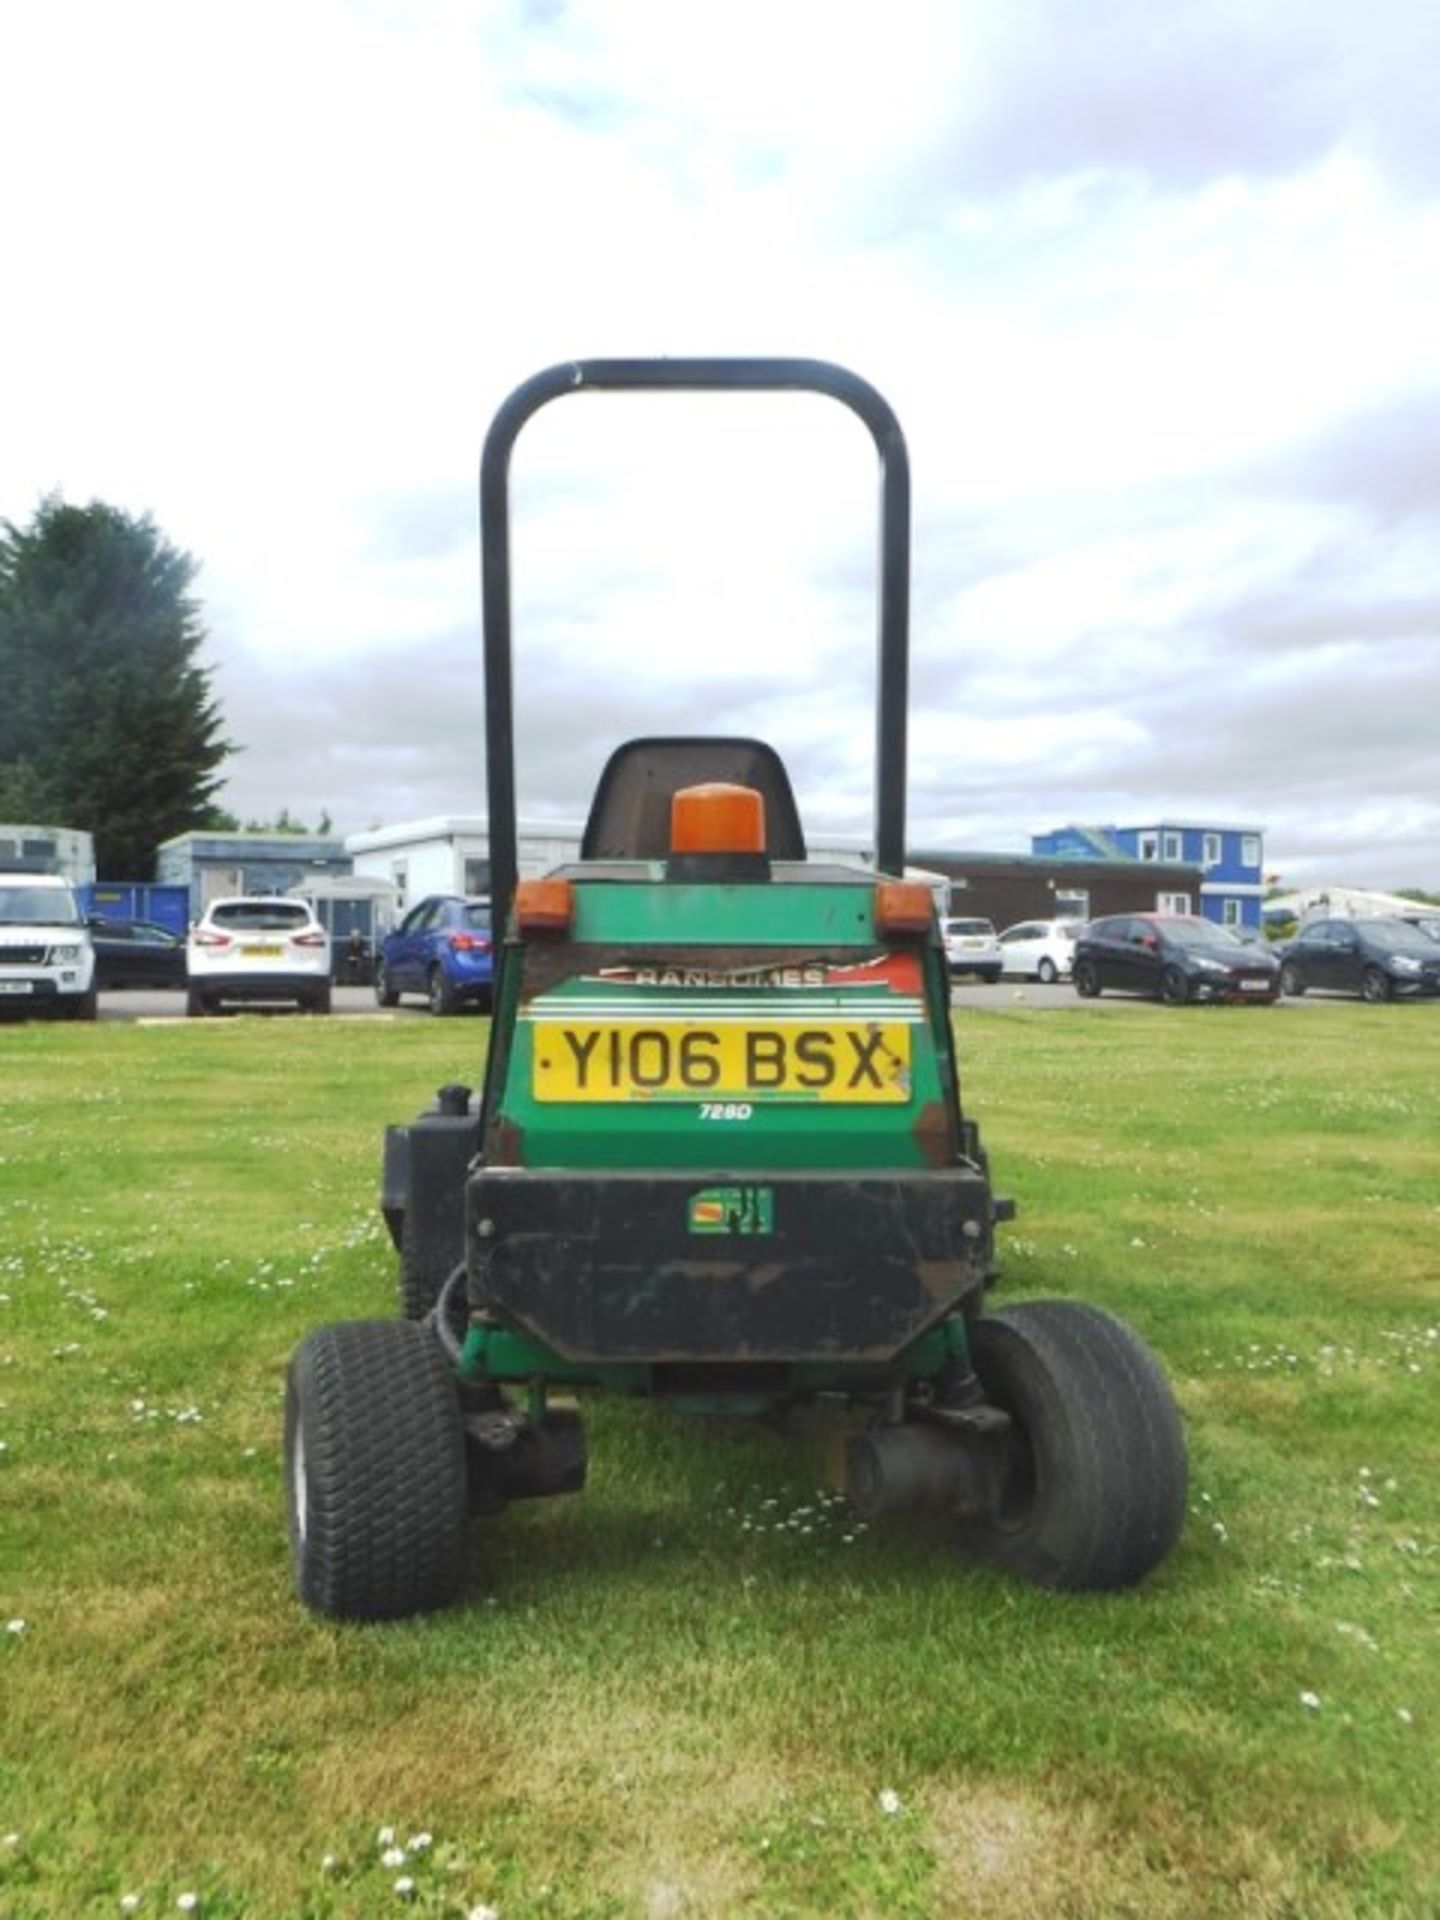 RANSOMES FRONT LINE 7280 ride on mower. Reg - Y106BSX. 4029hrs (not verified) - Image 10 of 13